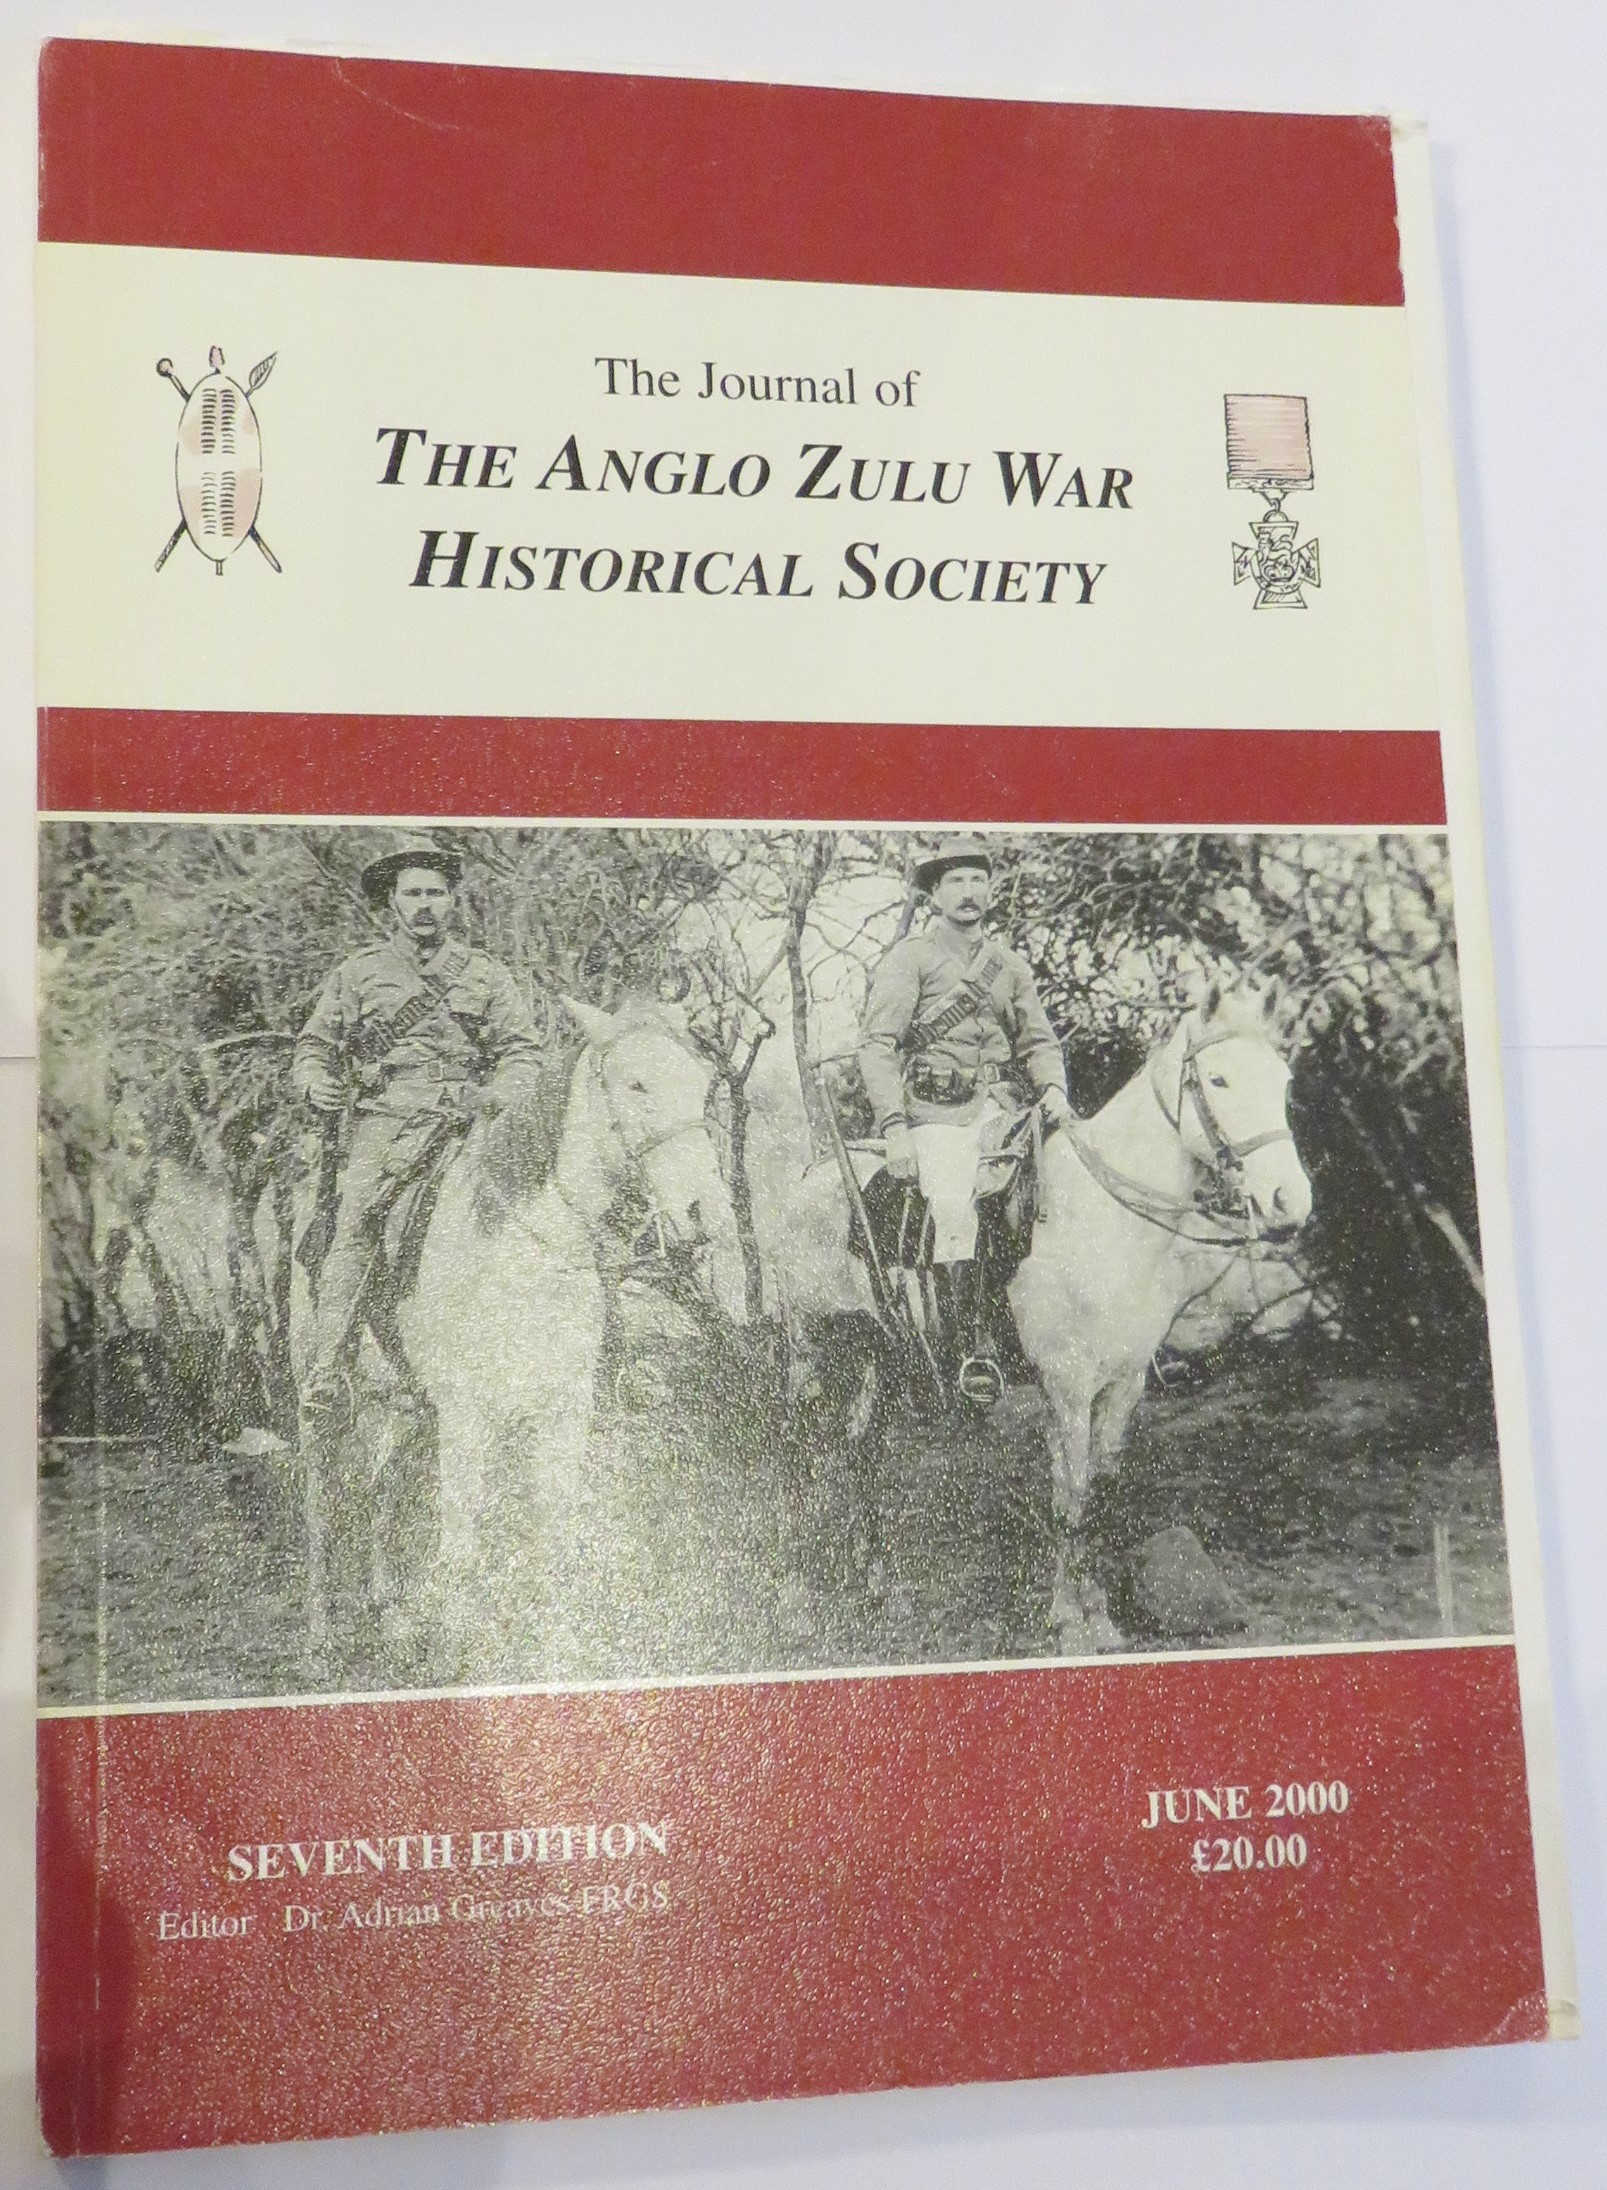 The Journal of the Anglo Zulu War Historical Society June 2000